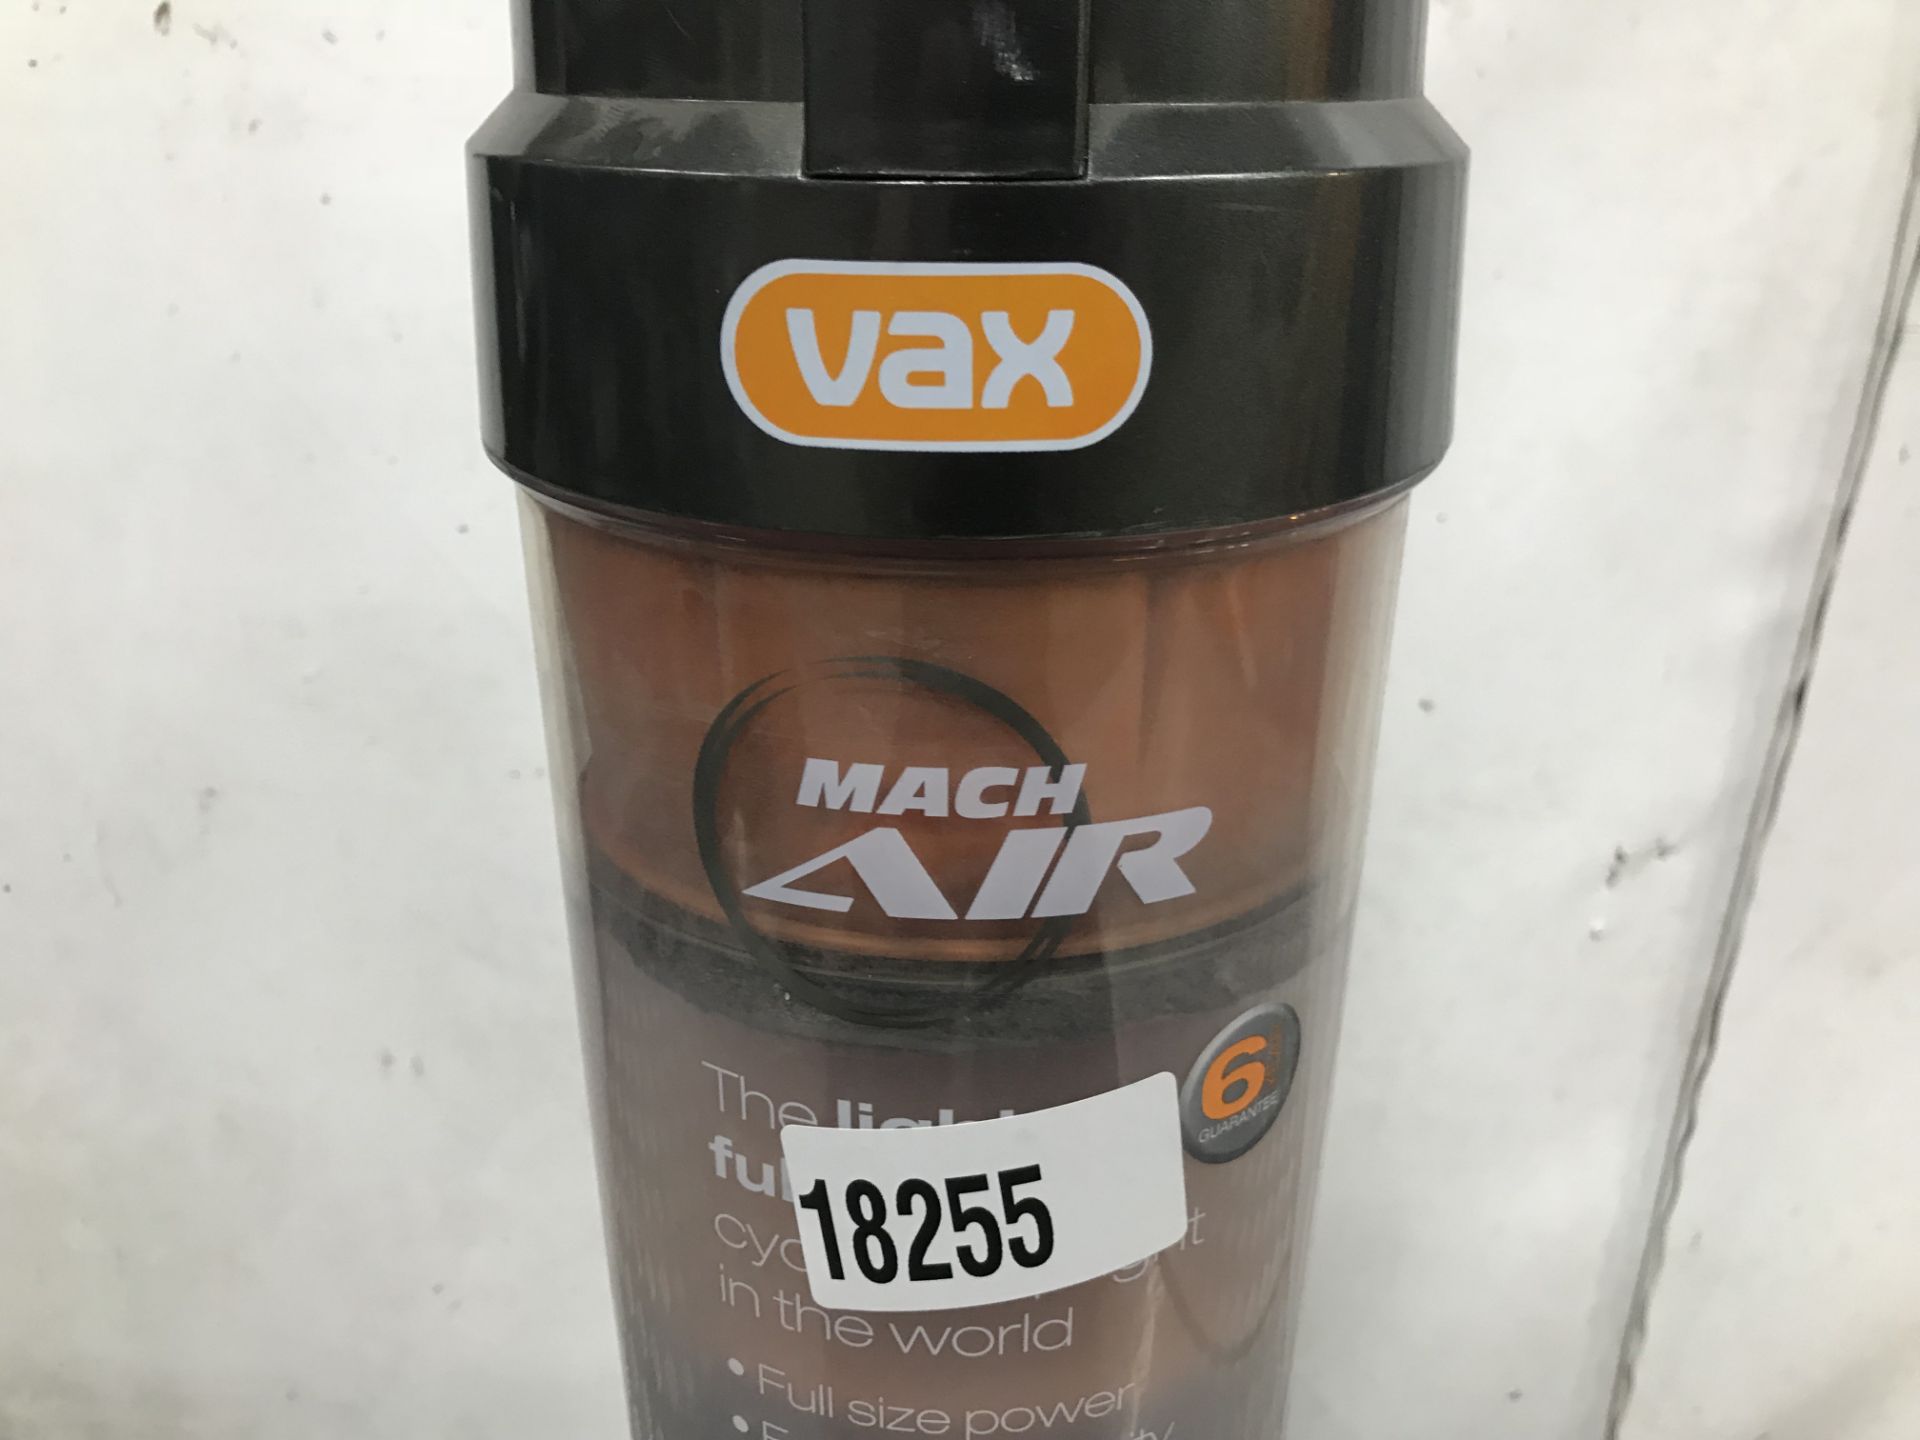 Mach Air Vax Upright Vacuum Cleaner - Image 3 of 4